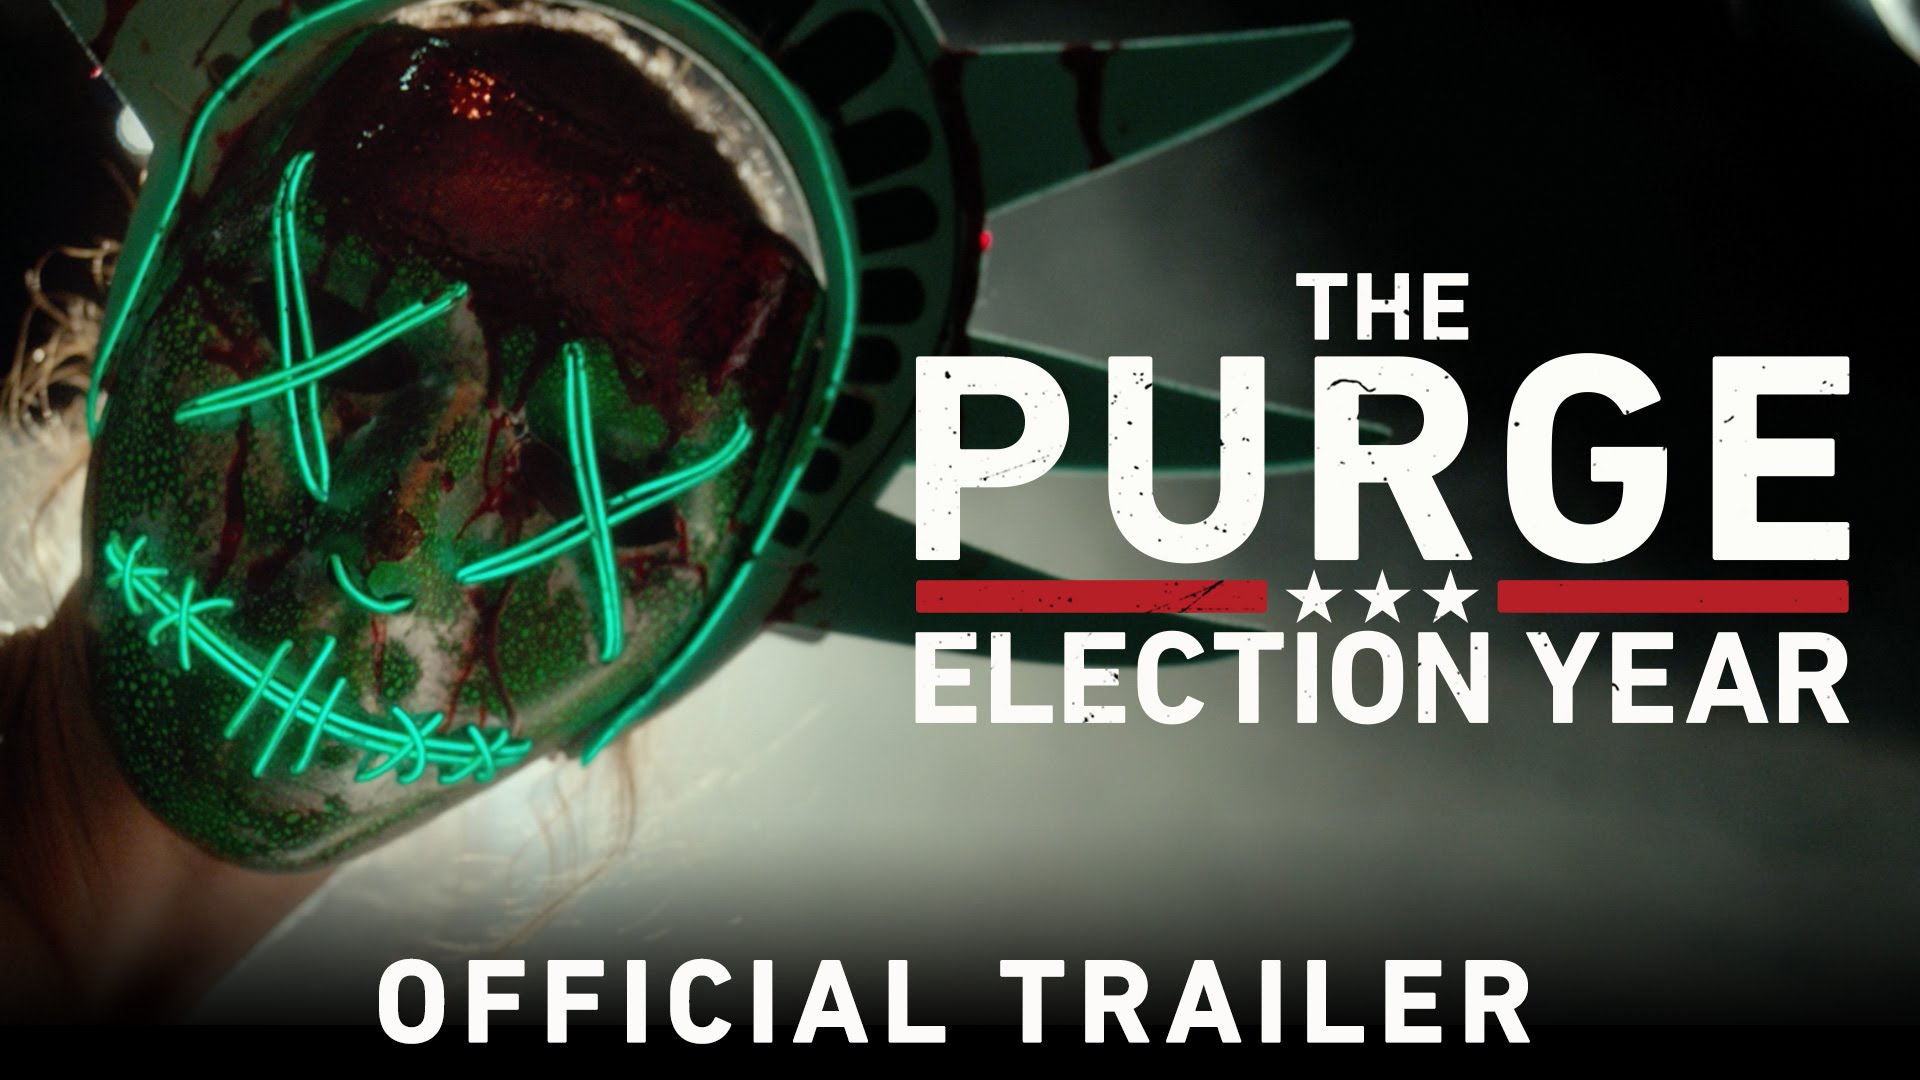 The Purge: Election Year - Official Trailer (HD)